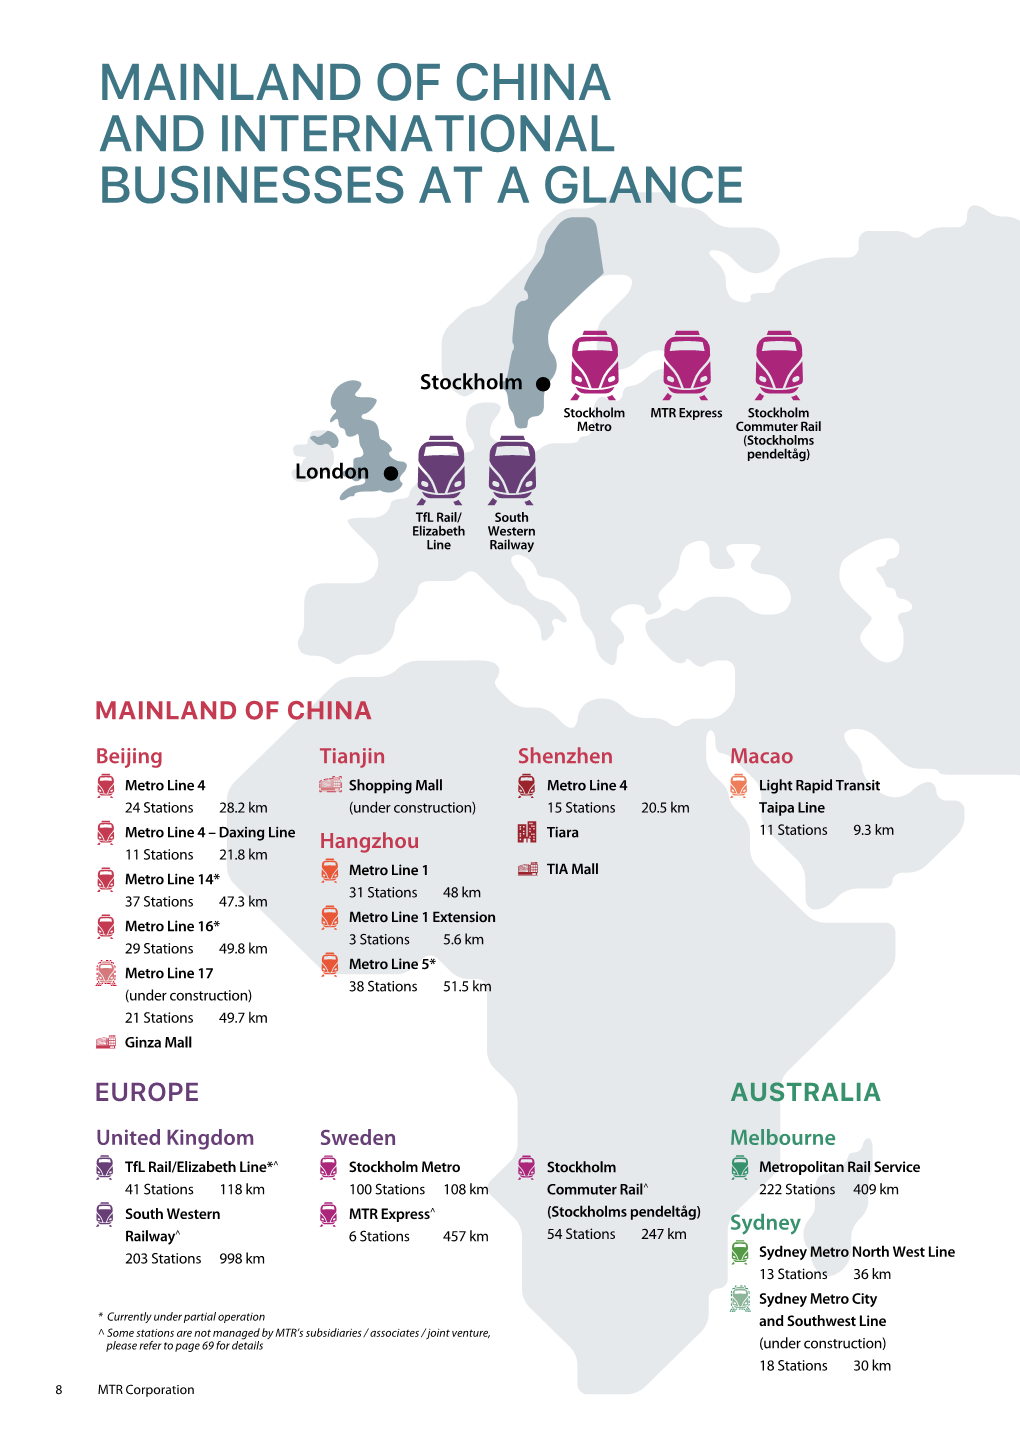 Mainland of China and International Businesses at a Glance